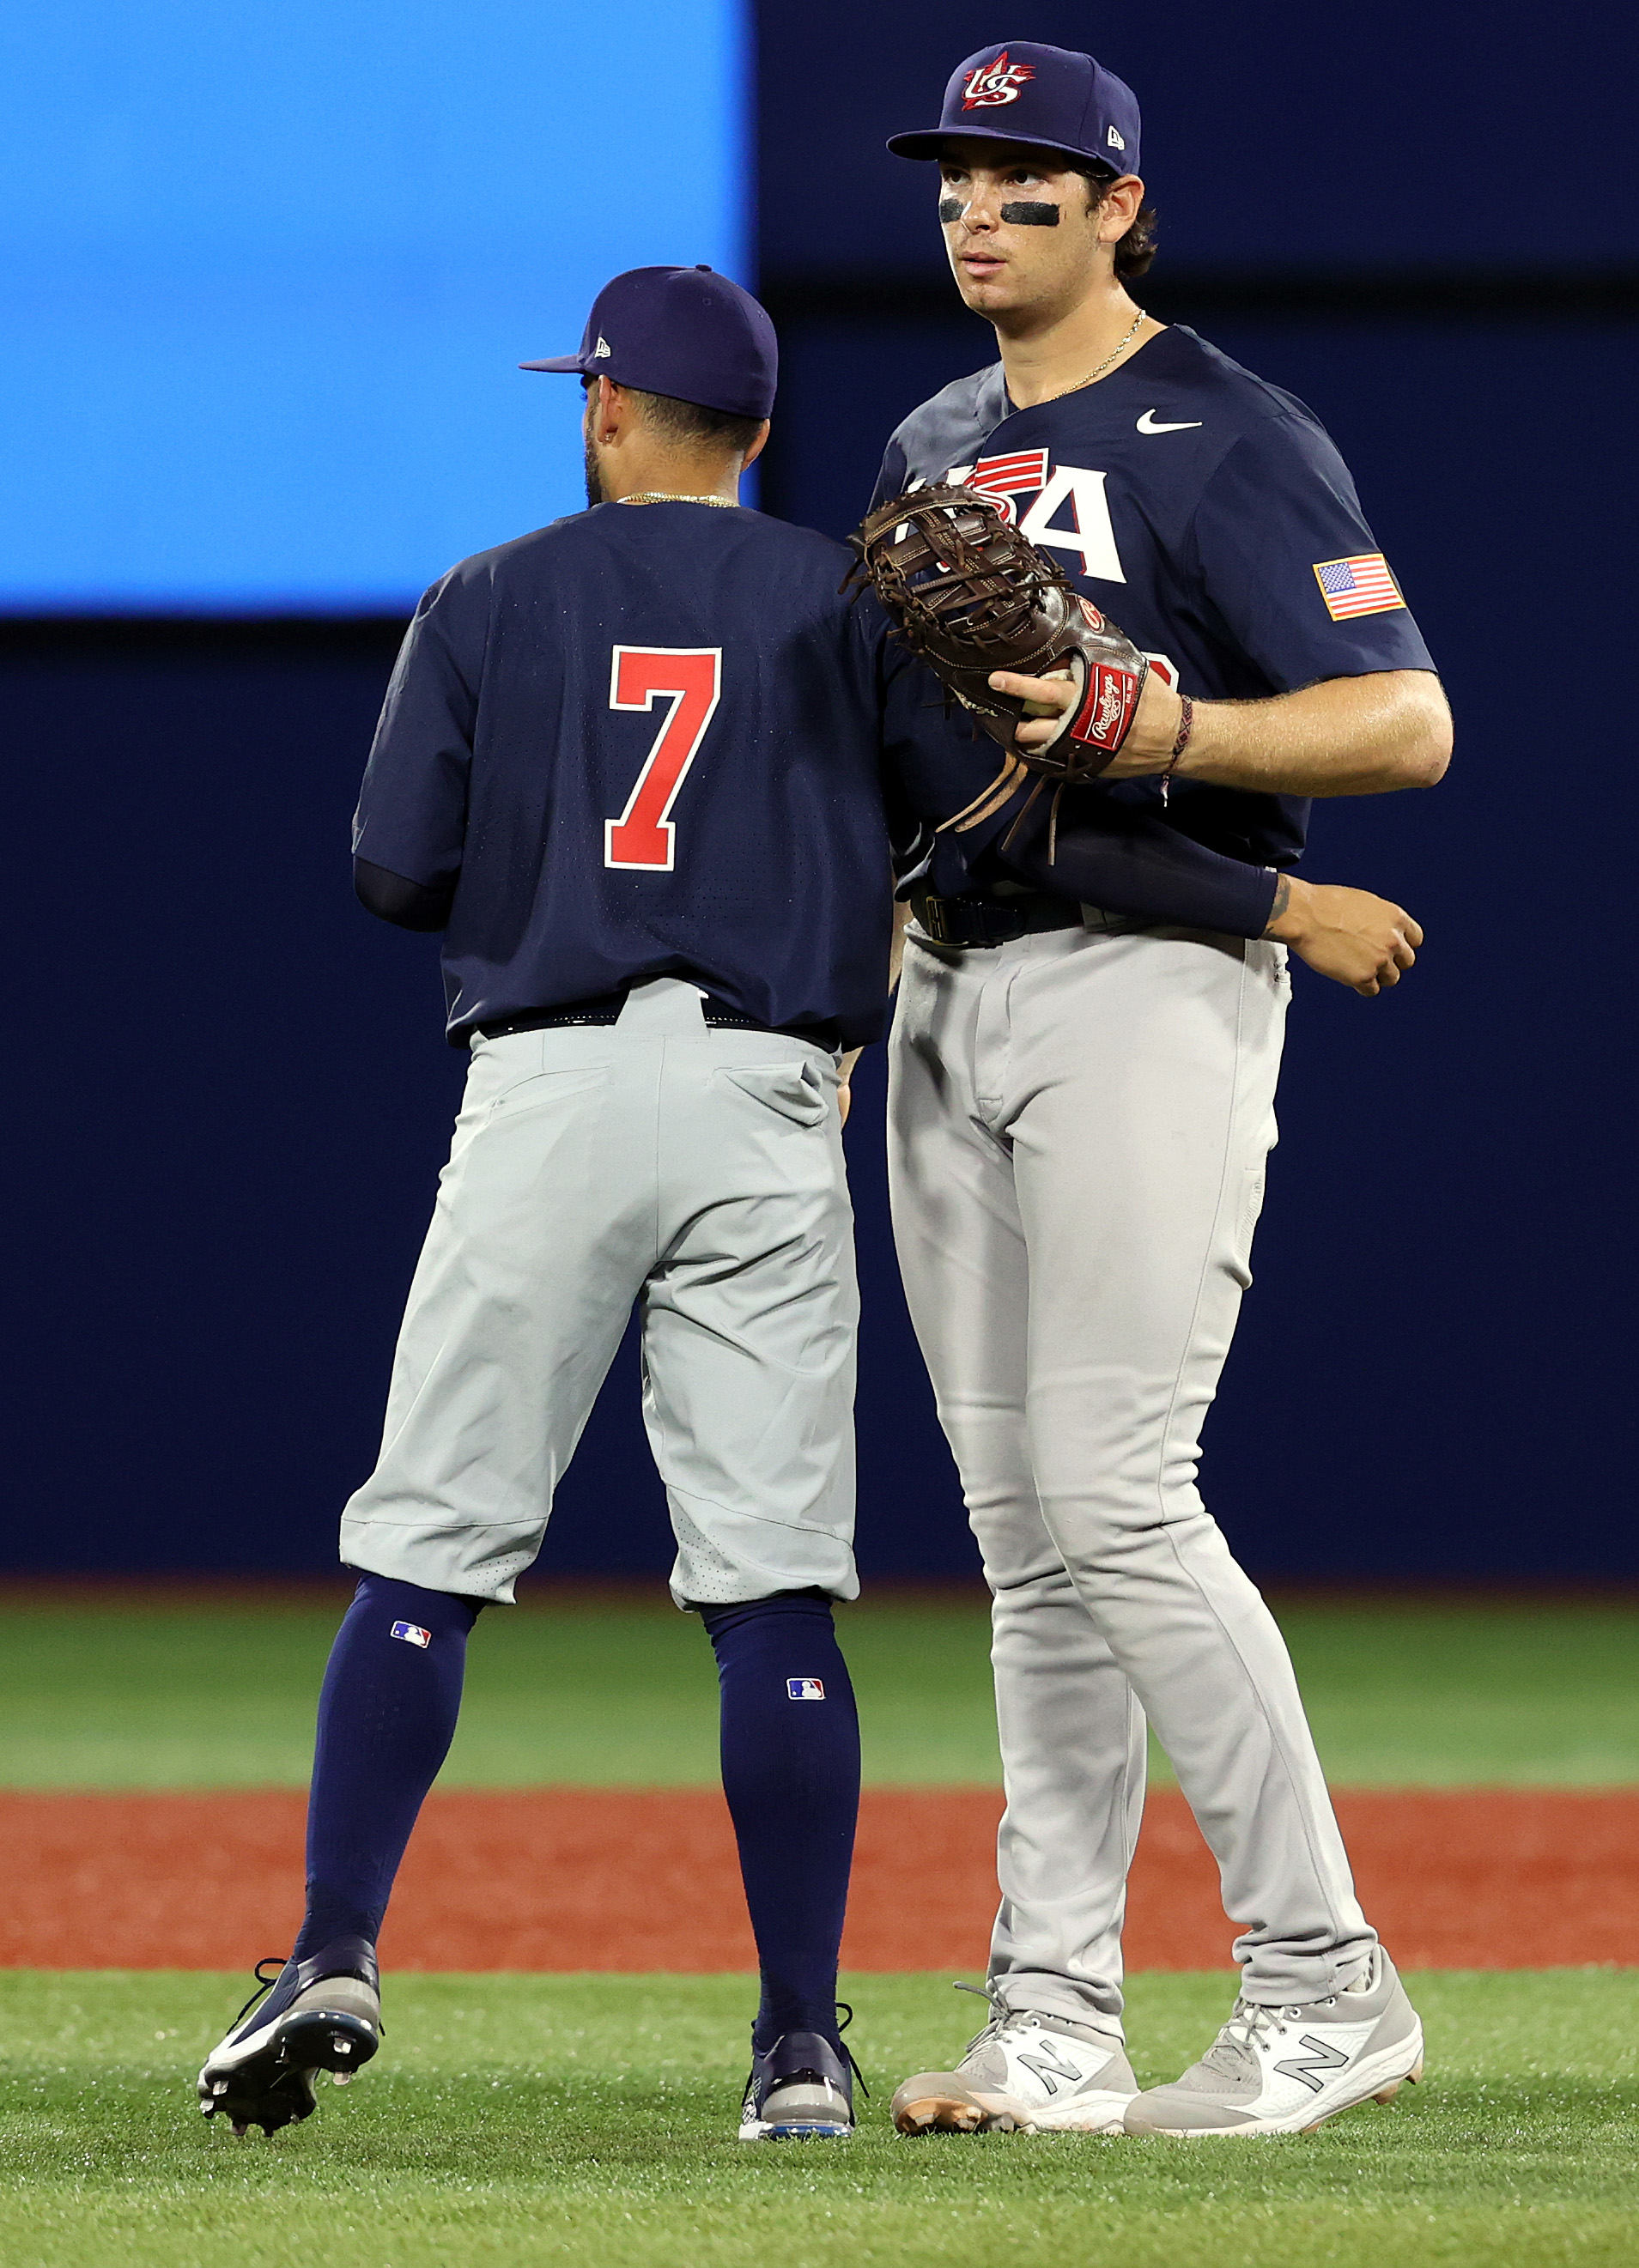 Boston Red Sox prospect Triston Casas impressed Mike Scioscia at Olympics:  'He's going to play in the big leagues for a long time' 